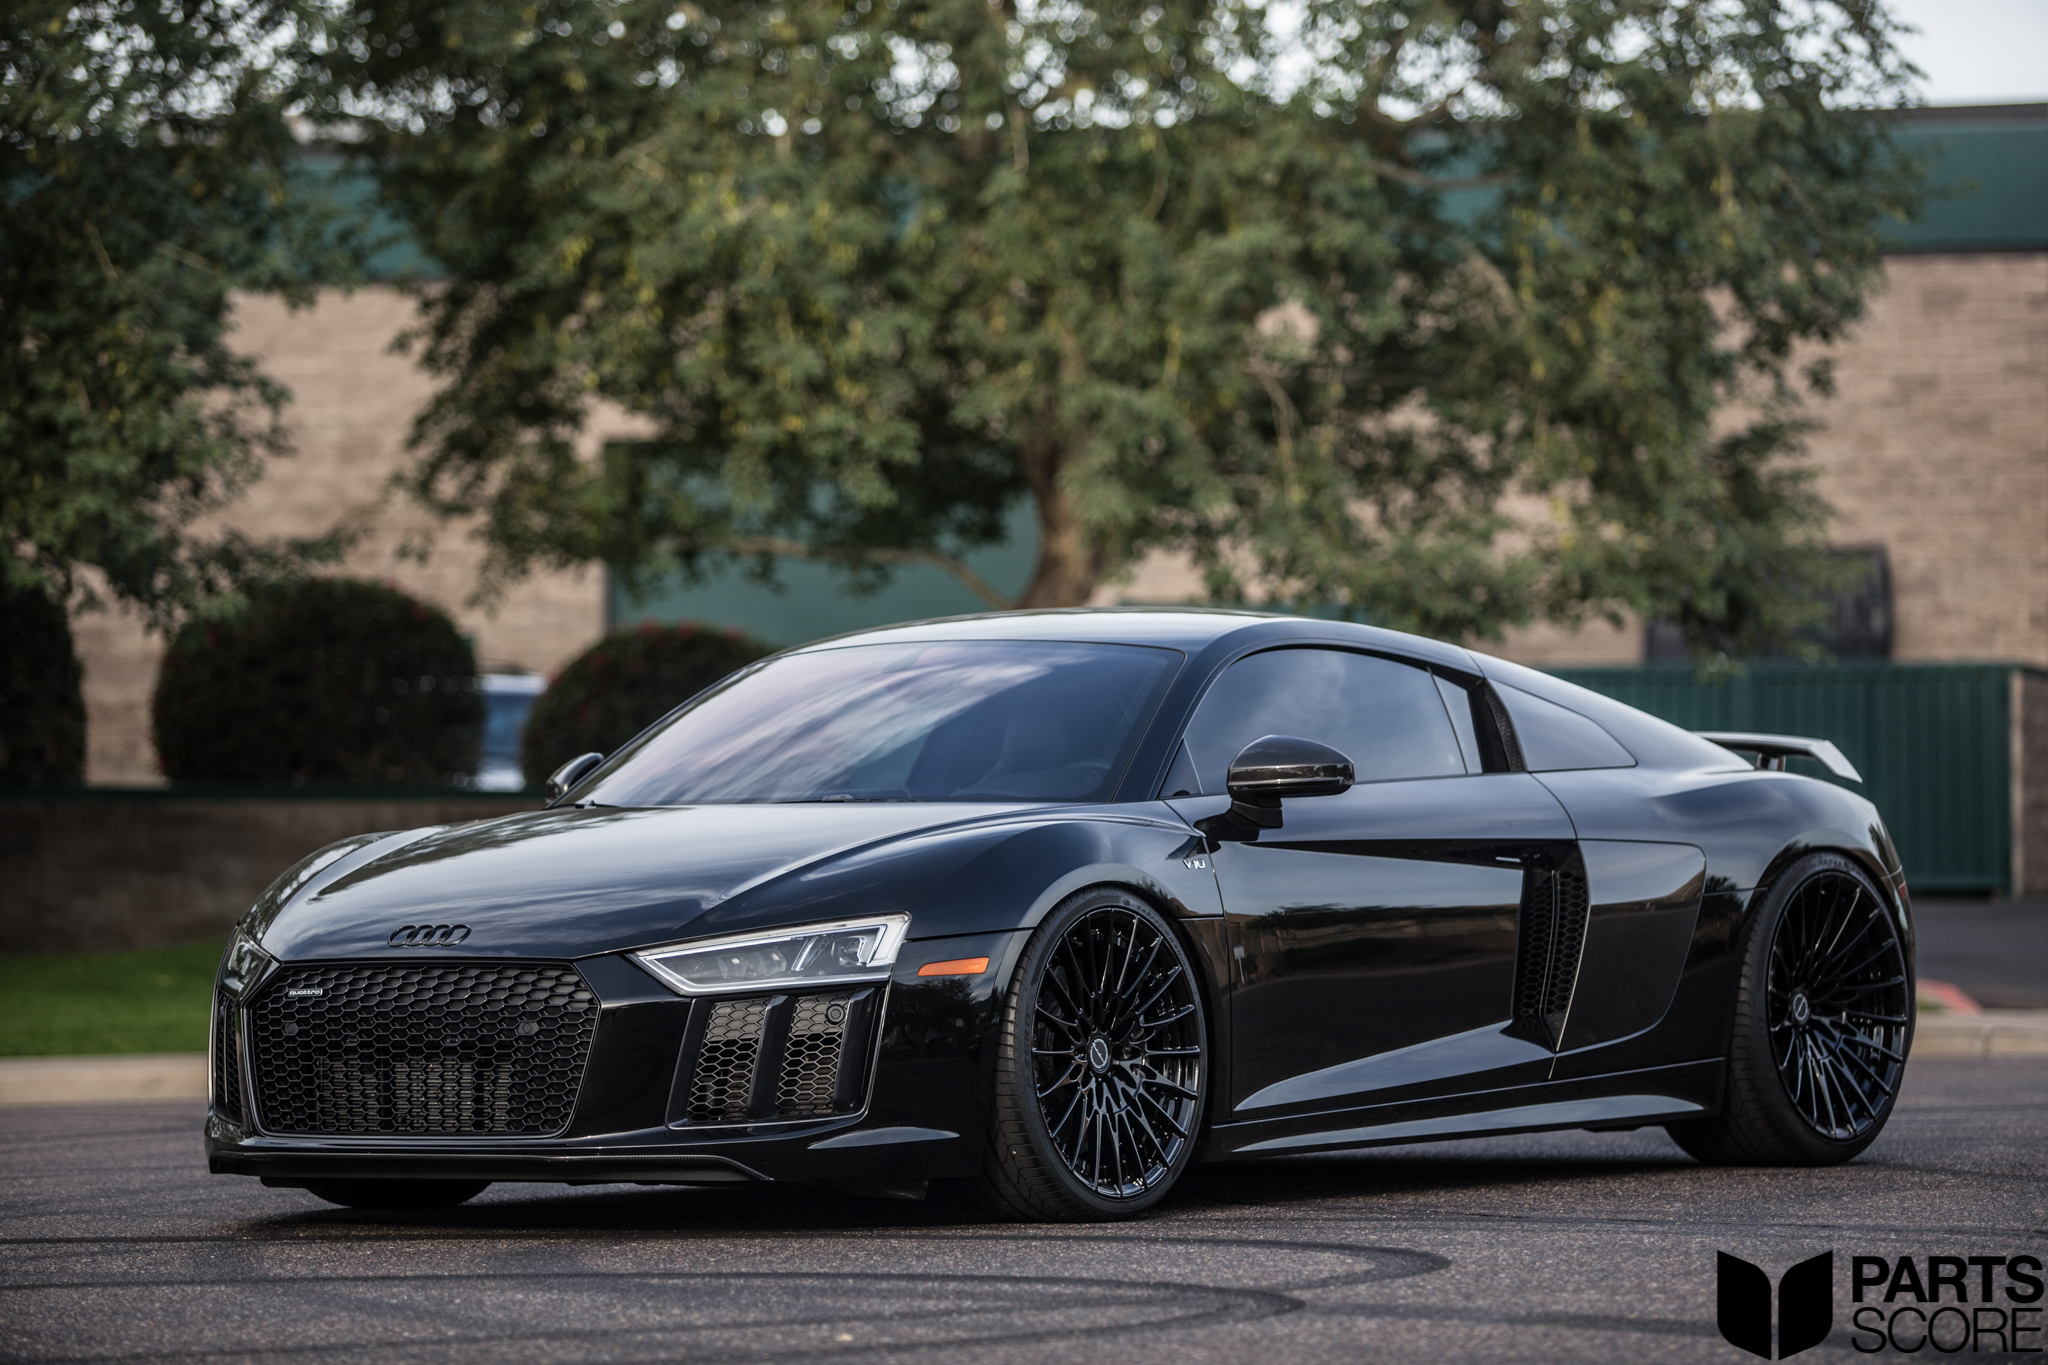 2 piece wheels, 205mph, 605hp, all wheel drive, audi r8, audi r8 coilovers, audi r8 modifications, audi r8 mods, audi r8 shock failure, audi r8 v10, audi r8 v8, audi rs, audi wheels, audi wheels scottsdale, audir8, awd, brixton, brixton forged, brixton forged wheels, brixton wheels, Coilovers, coils, height adjustable spring, hyper car, new wheels, parts score, partsscore, quattro, r8, r8 coilovers, r8 lms, r8 springs, r8 suspension, r8 v10 +, r8 v10 coilovers, r8 v10 h.a.s. kit, r8 v10 has kit, r8 v10 height adjustable spring kit, r8 v10 plus, r8 v10 plus mods, r8 v10 springs, r8 v10 wheels, r8 v8 coilovers, r8 v8 has kit, r8 v8 springs, r8 wheels, r8racecar, r8v10+, r8v10plus, r9v10, race, racecar, racing, slammed, Springs, stance, super car, supercar, track, track day, v10 plus mods, v8 v10, wheels